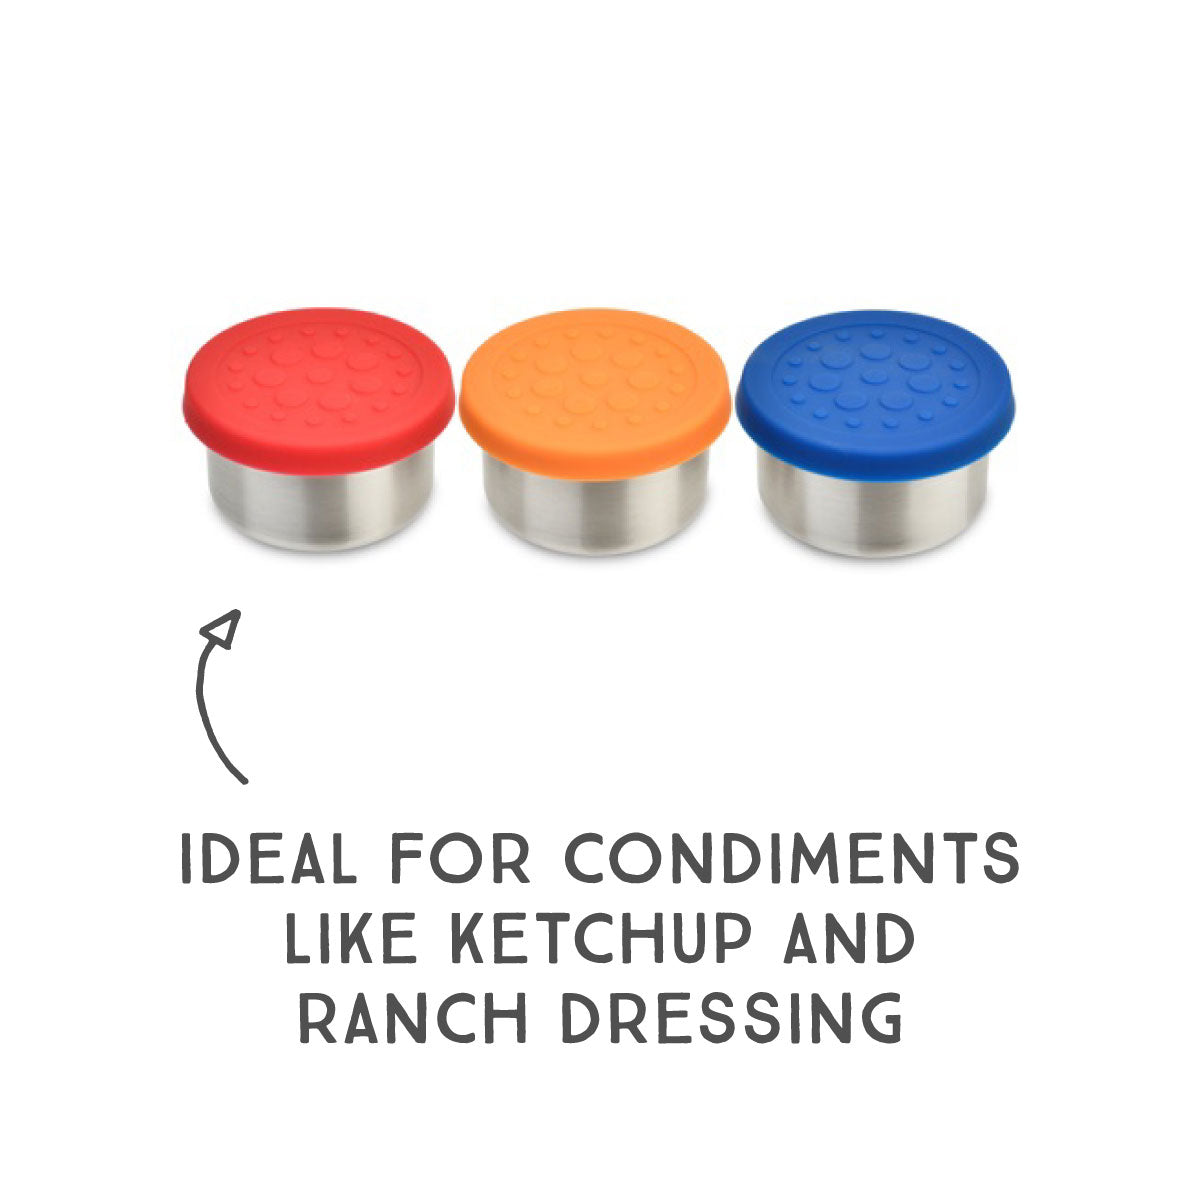 Salad Dressing Container to Go, 6 Pack | 2.7 Oz. Dressing Containers for  Lunch B